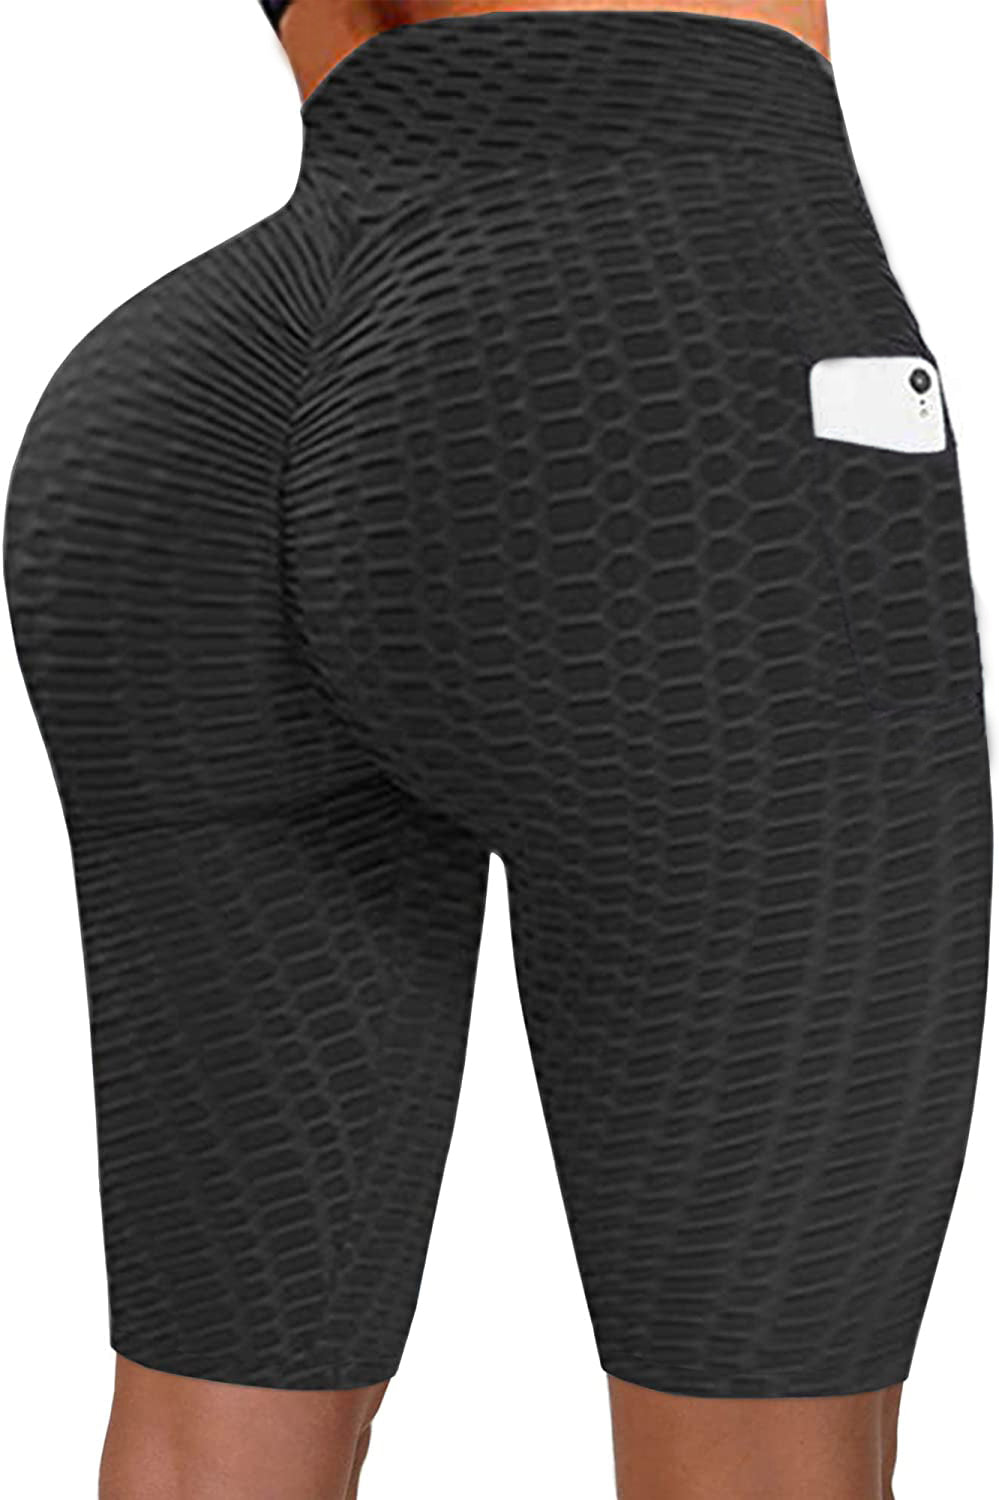 Up To 84% Off on Haute Edition Women's Booty L